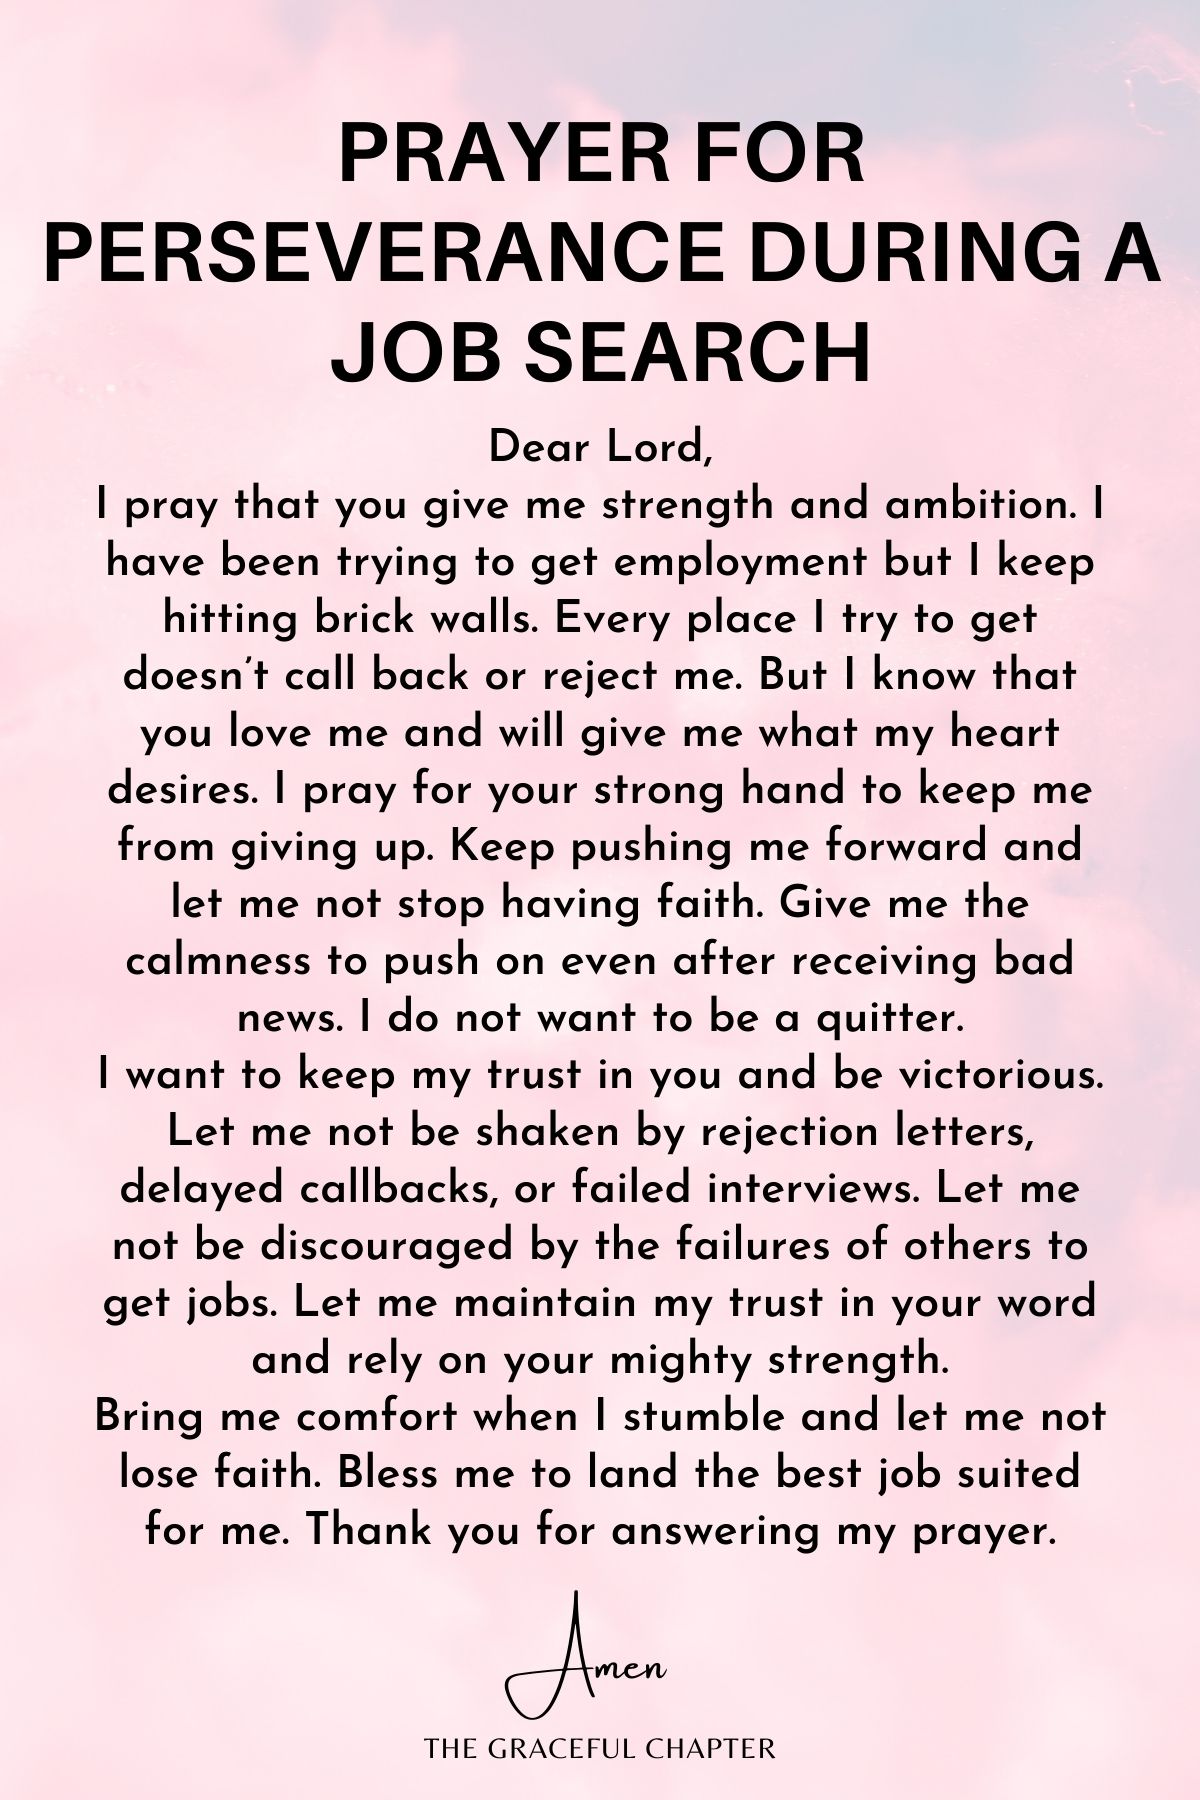 Prayer of Perseverance During a Job Search